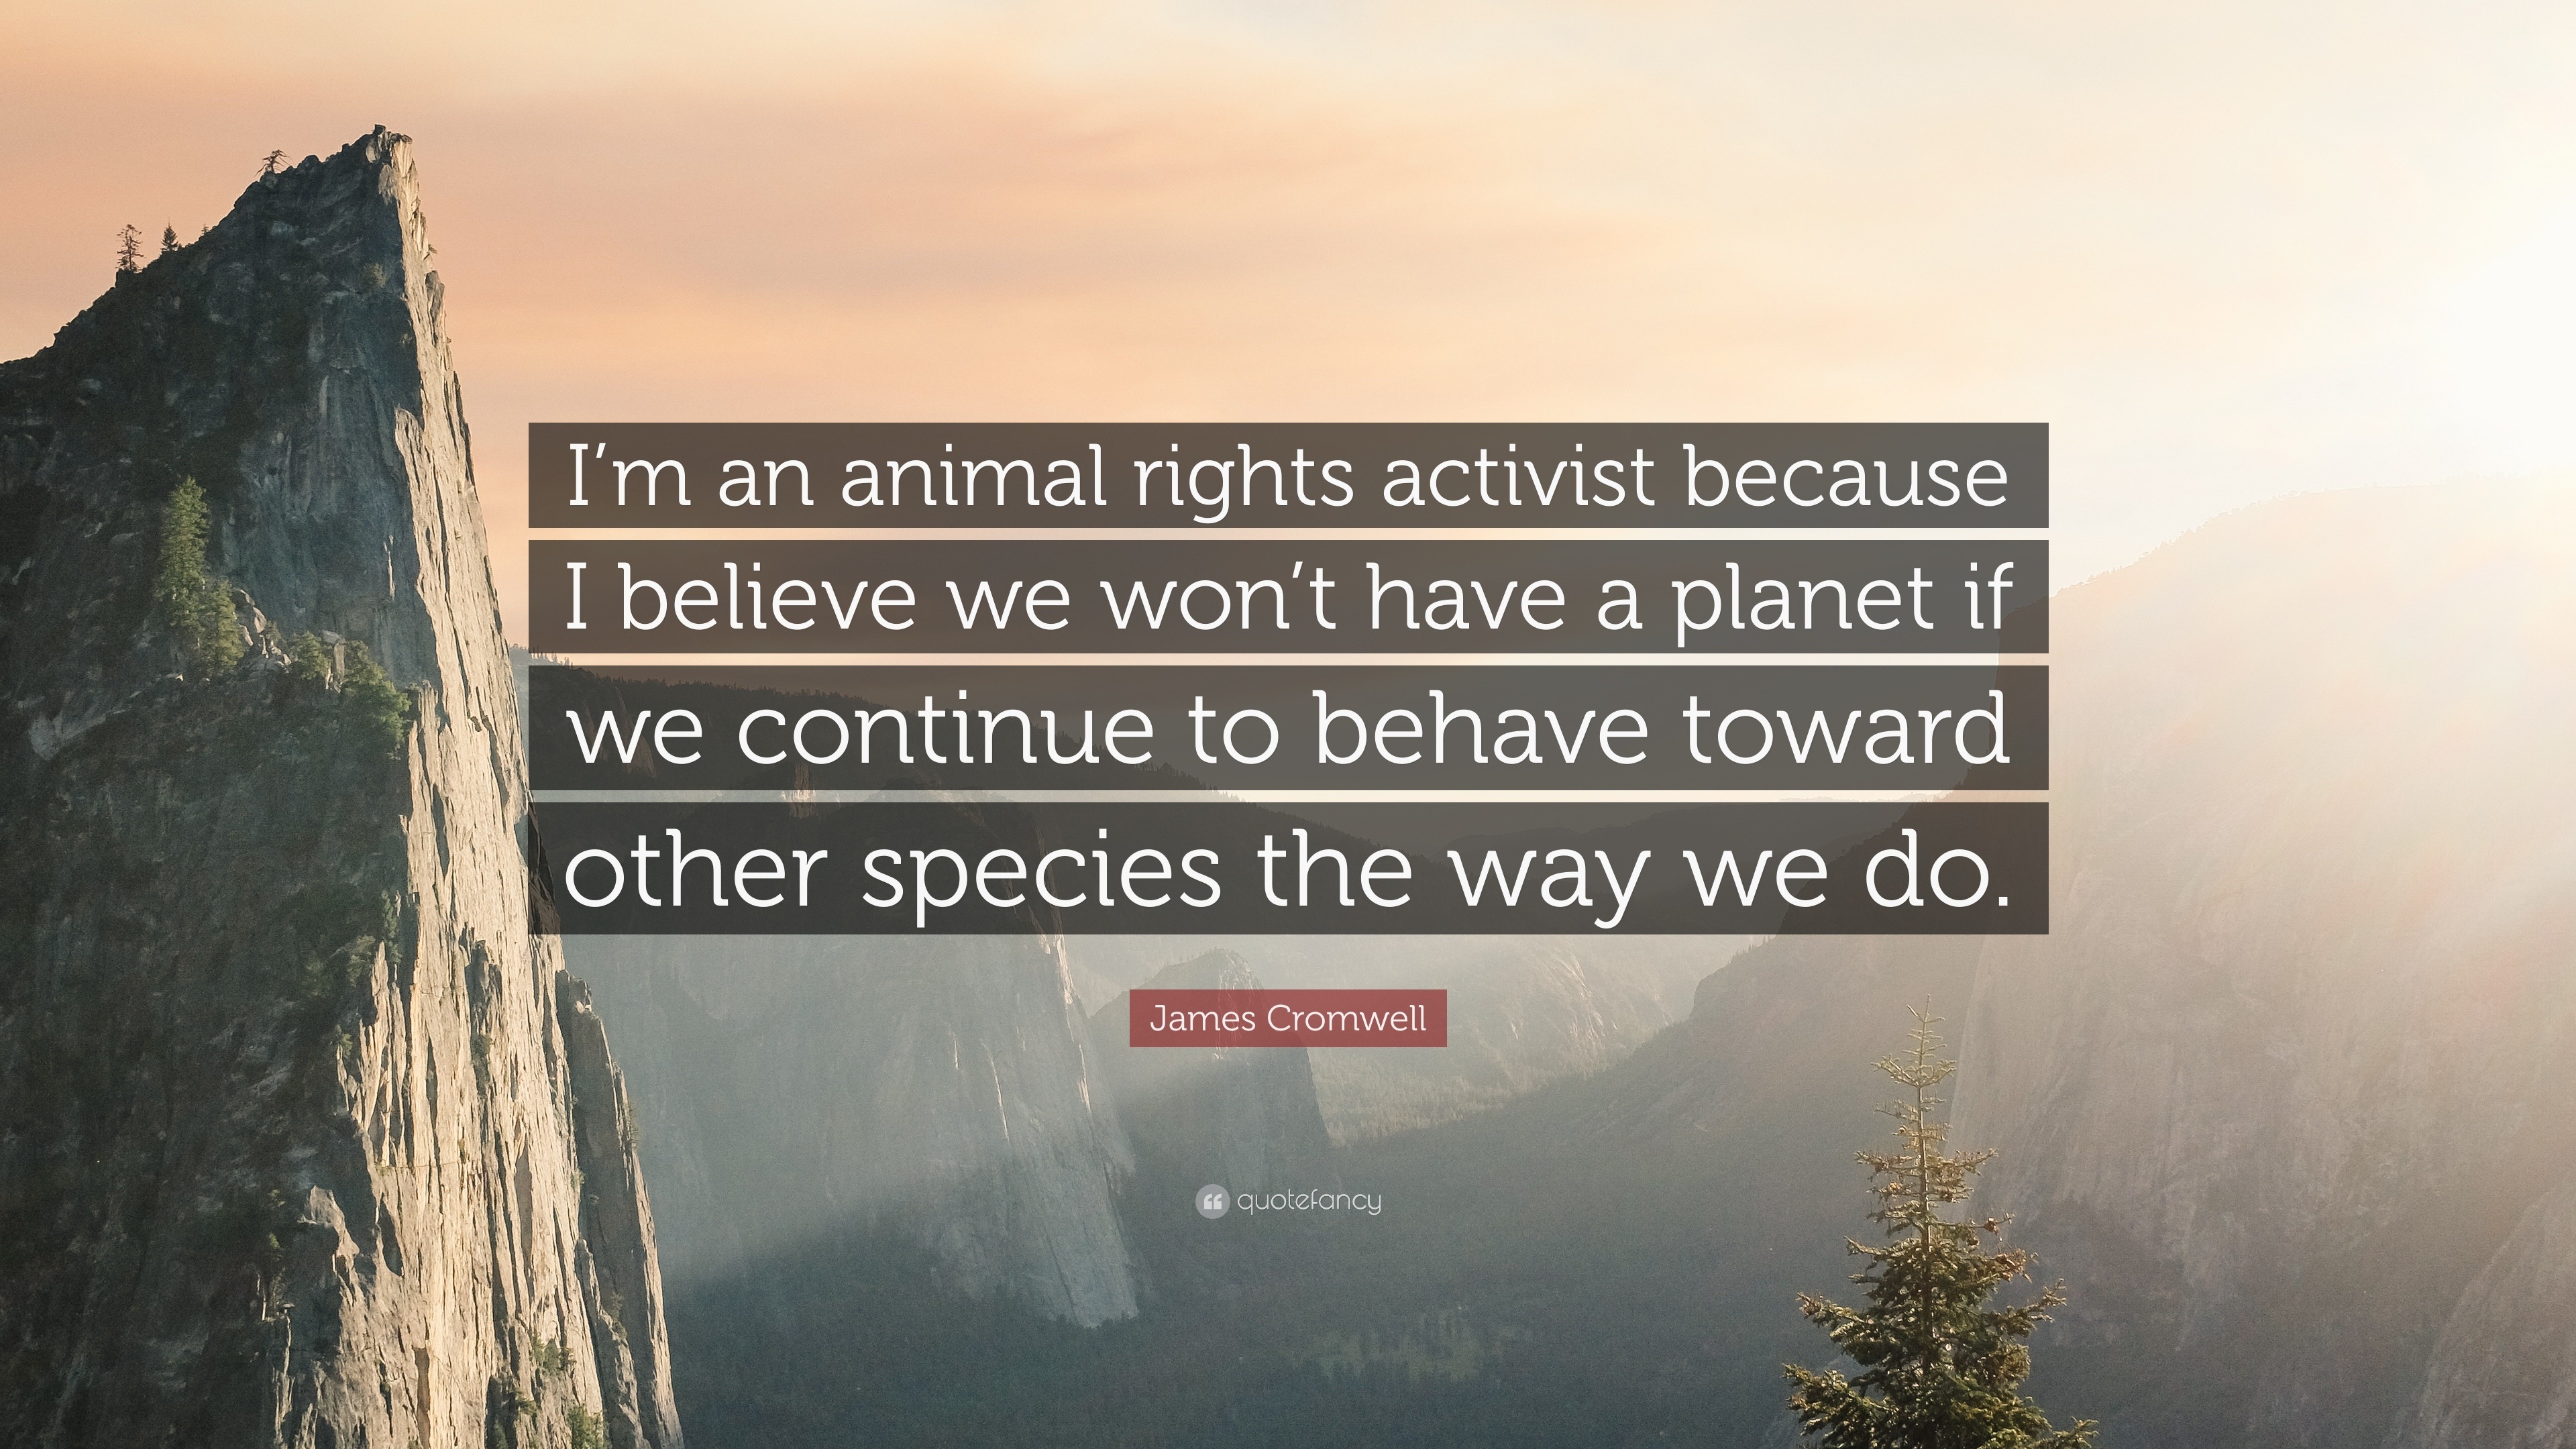 James Cromwell Quote: “I’m an animal rights activist because I believe